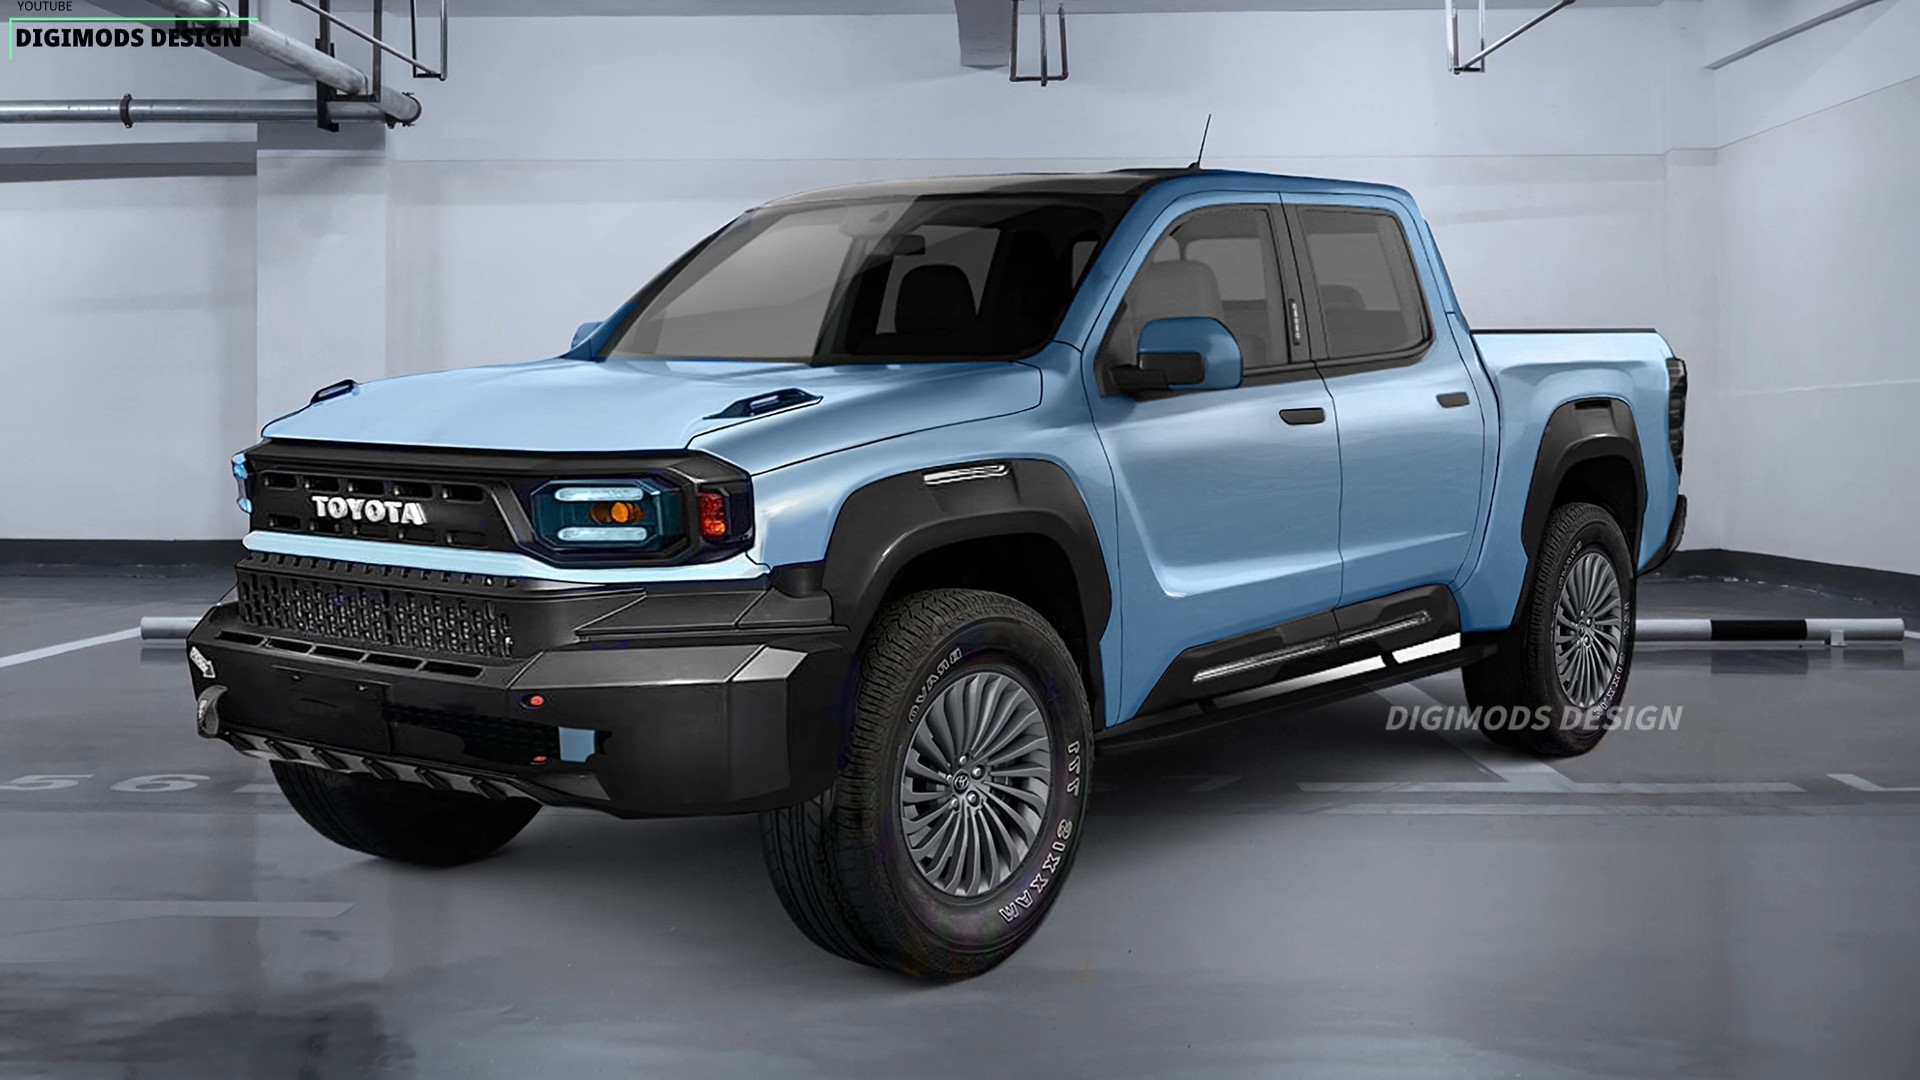 2025 Toyota Stout Makes Digitally Rugged Comeback to Scare the